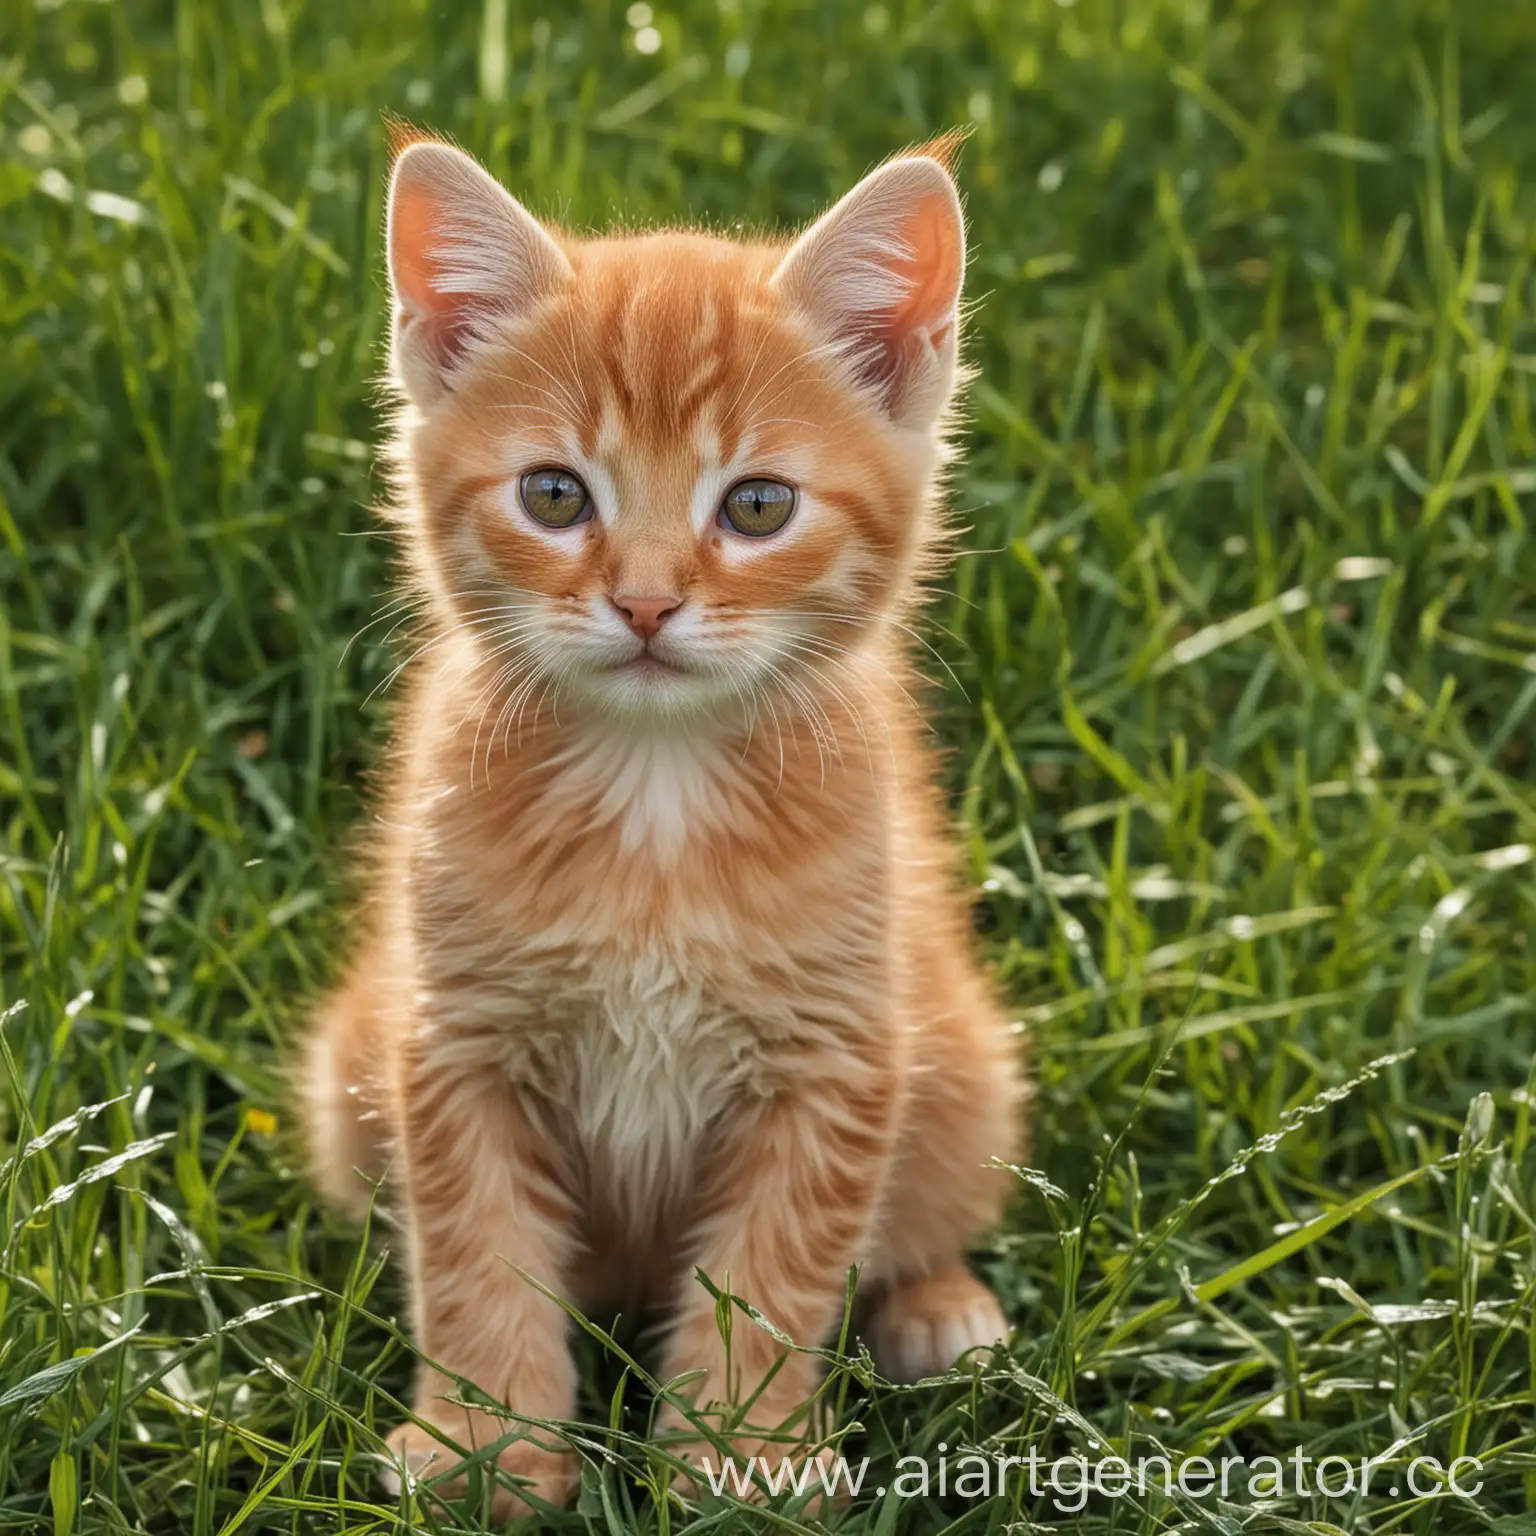 Adorable-Little-Red-Kitty-Resting-in-Lush-Green-Grass